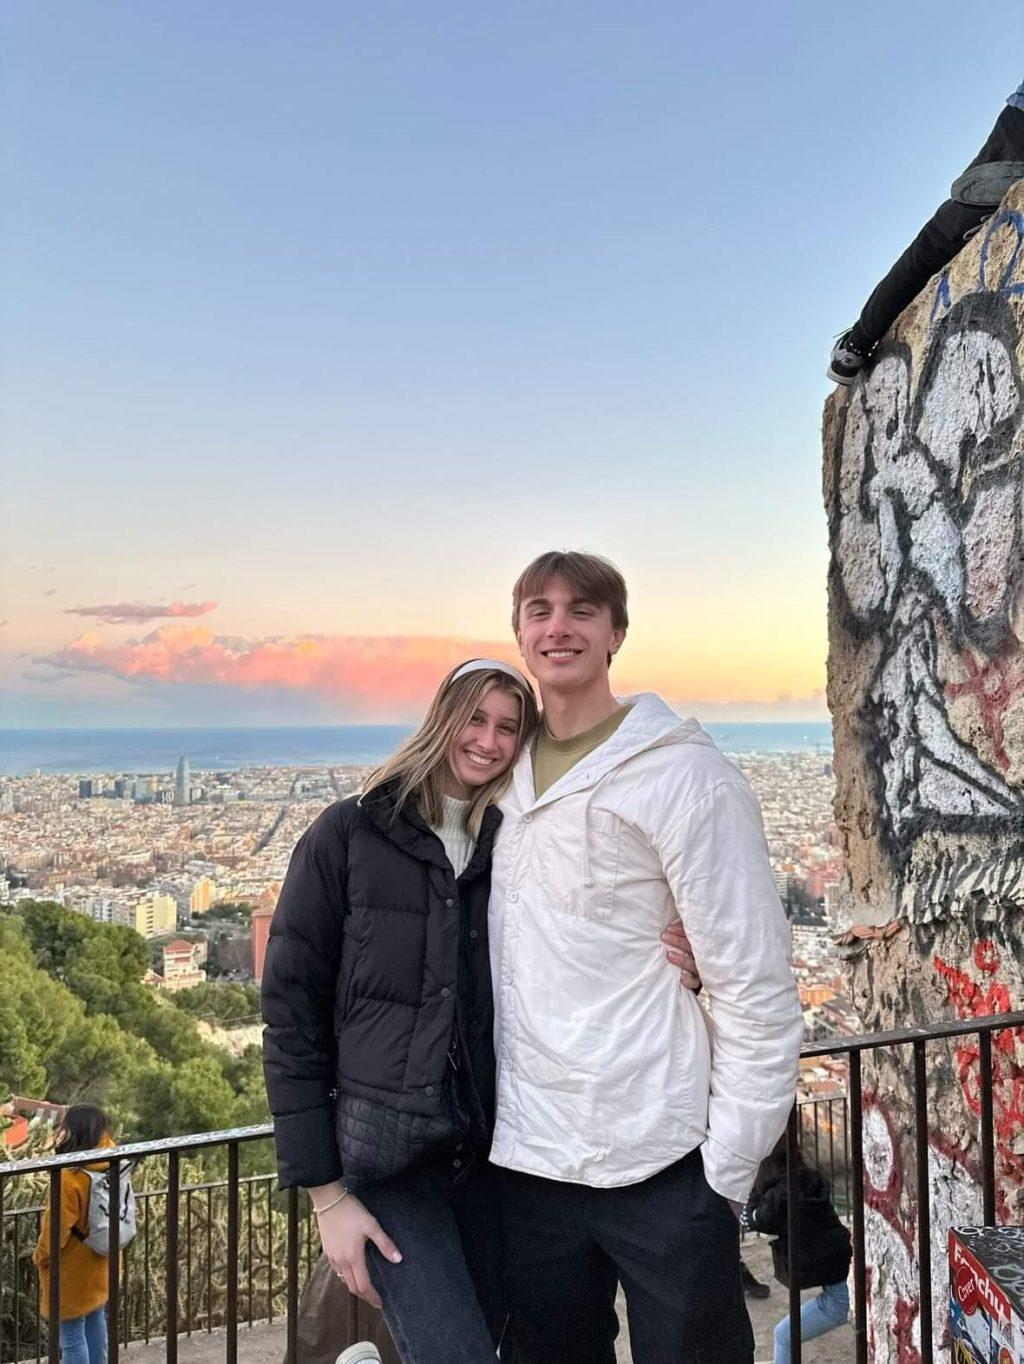 Rylie Bjork and Logan Ludwig enjoy the sunset in Barcelona in January. The couple said they love traveling around Europe together. Photo courtesy of Rylie Bjork